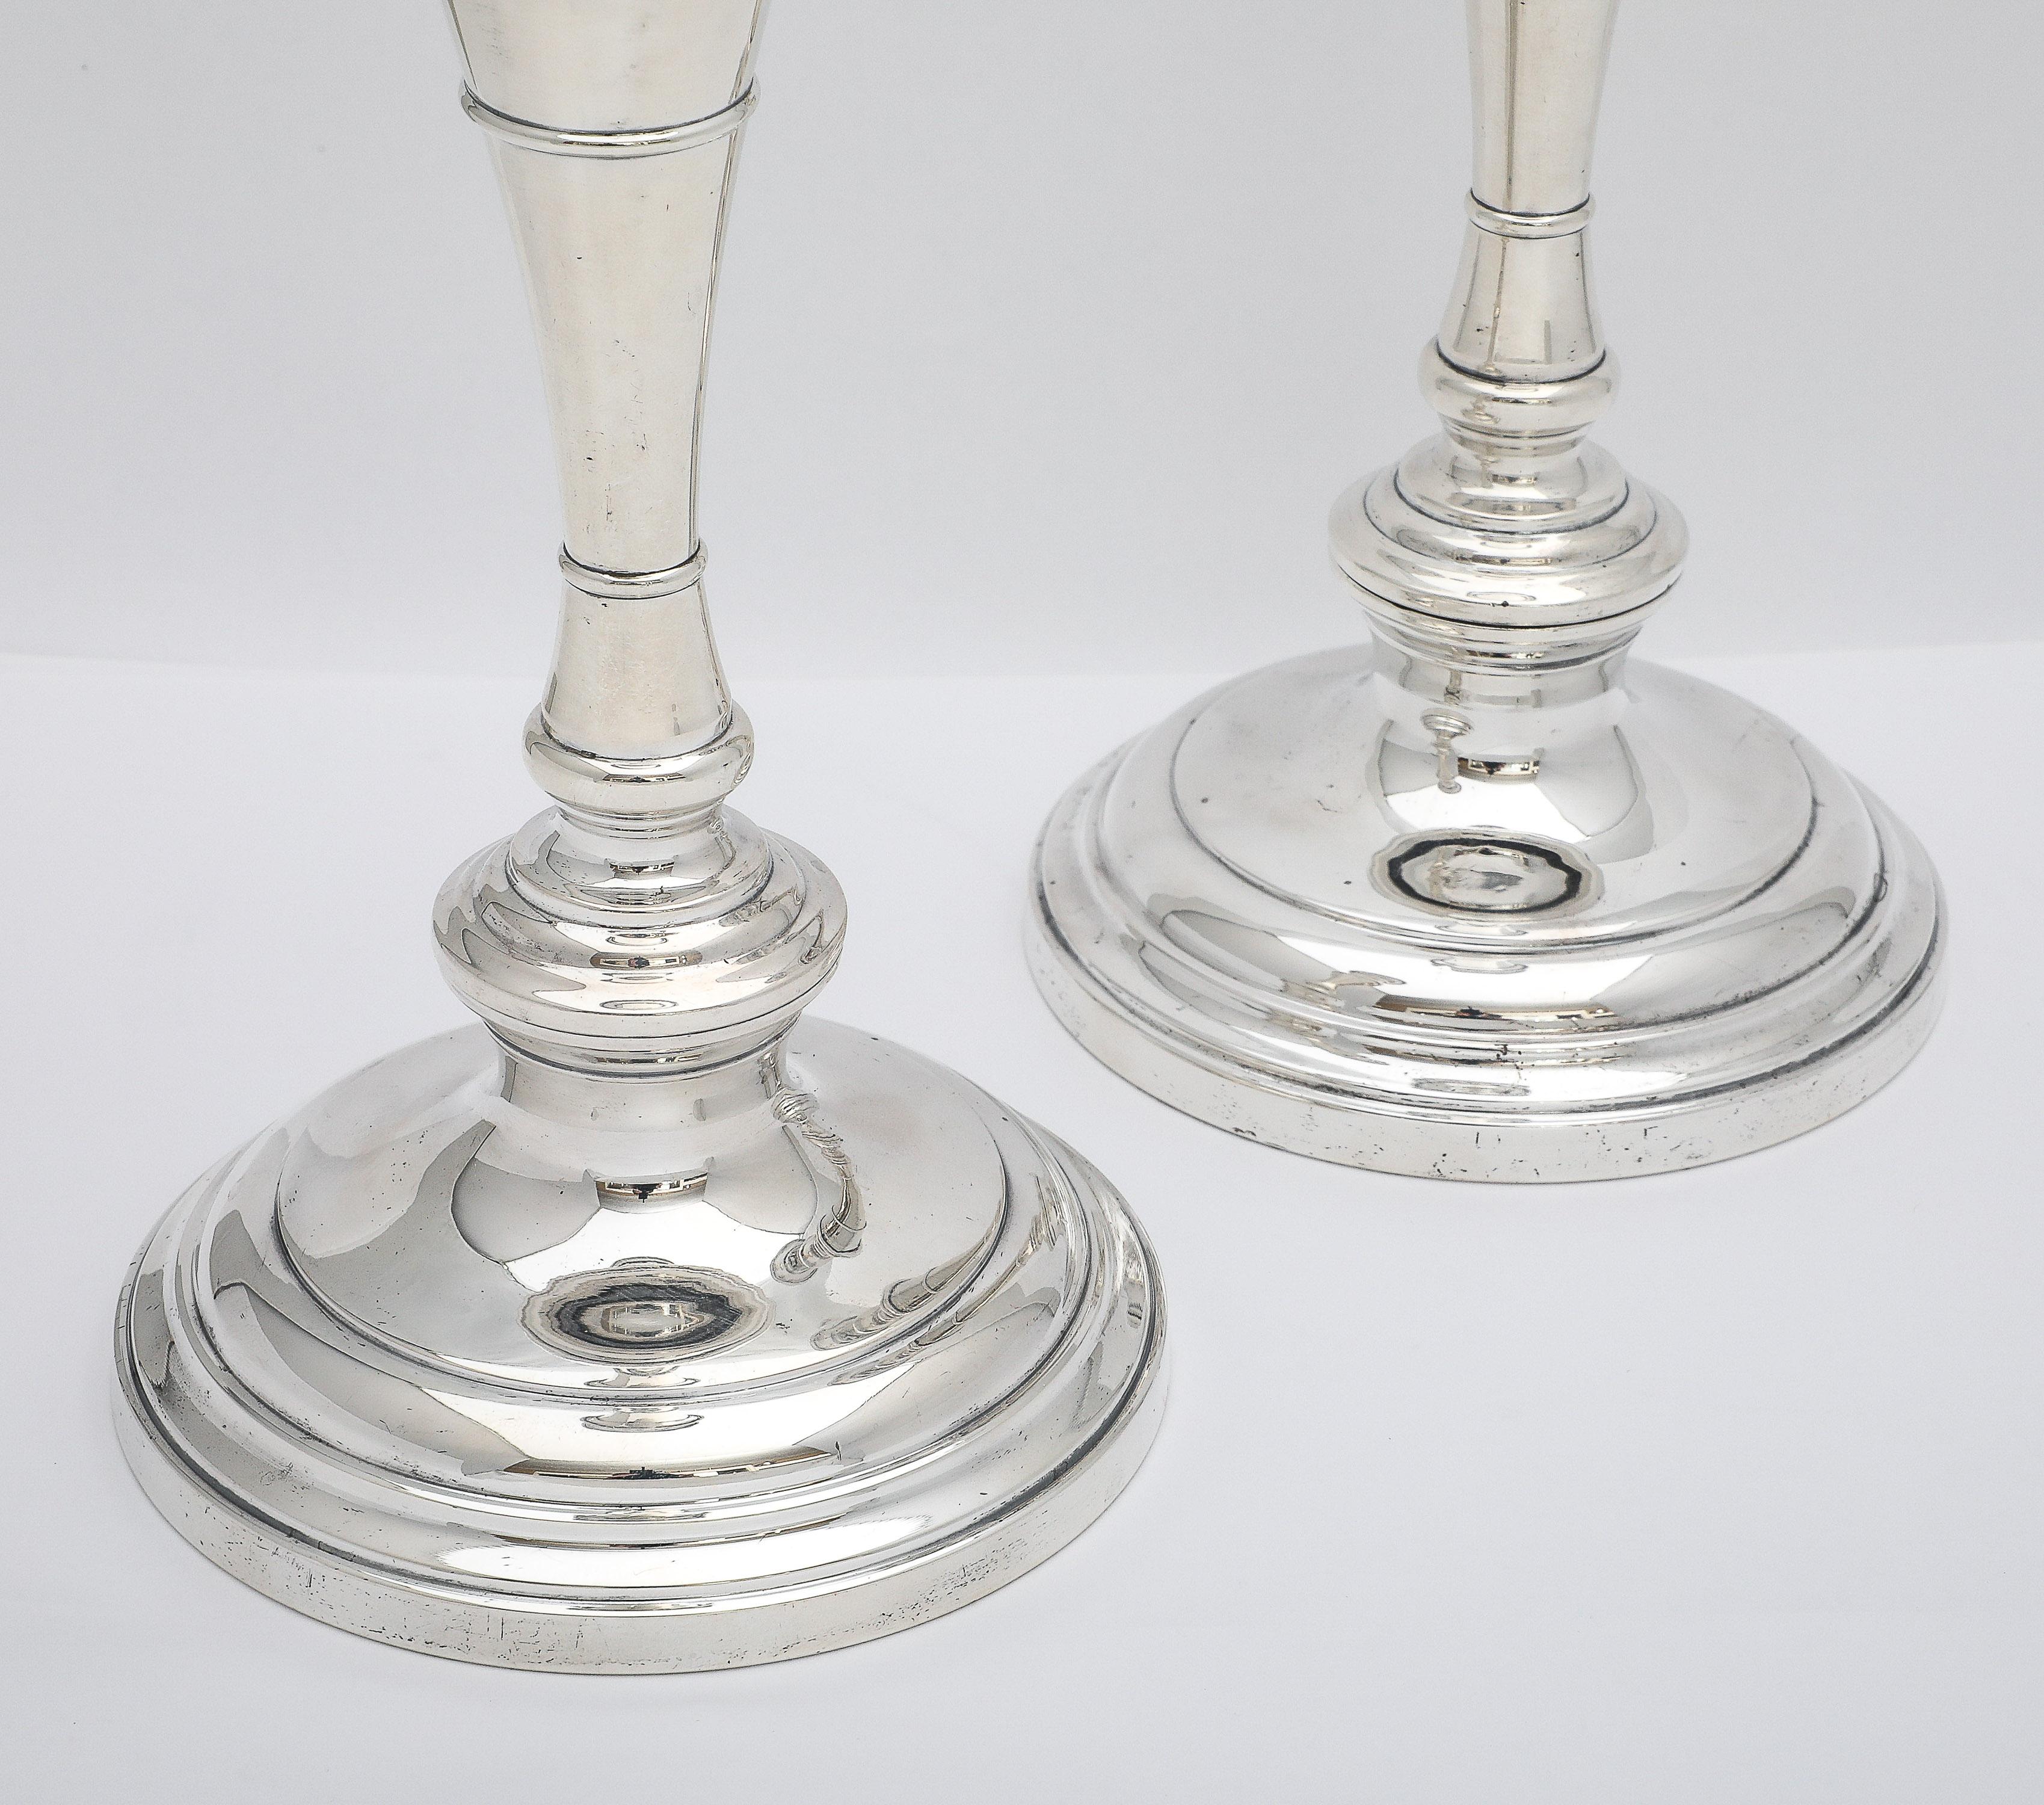  Tall Pair of Sterling Silver George III-Style Candlesticks - S. Kirk and Son For Sale 4